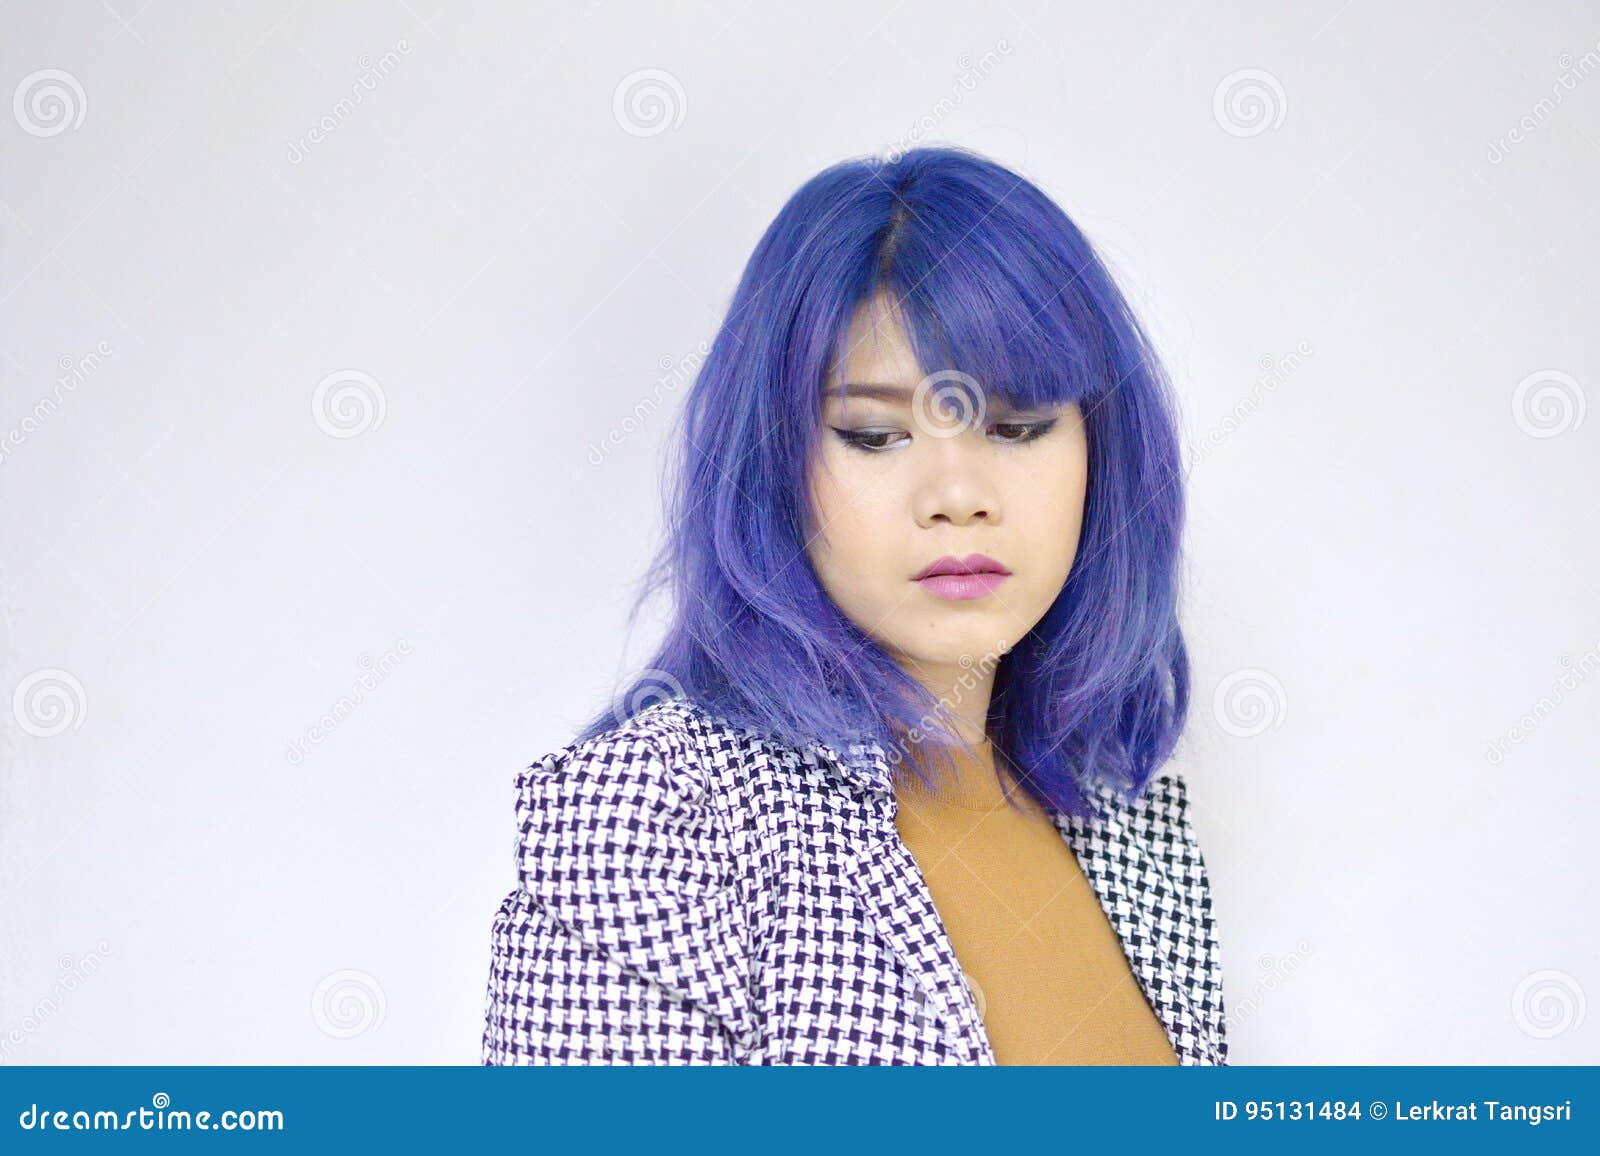 Blue Hair Asian Boy High Resolution Stock Photography and Images - wide 1